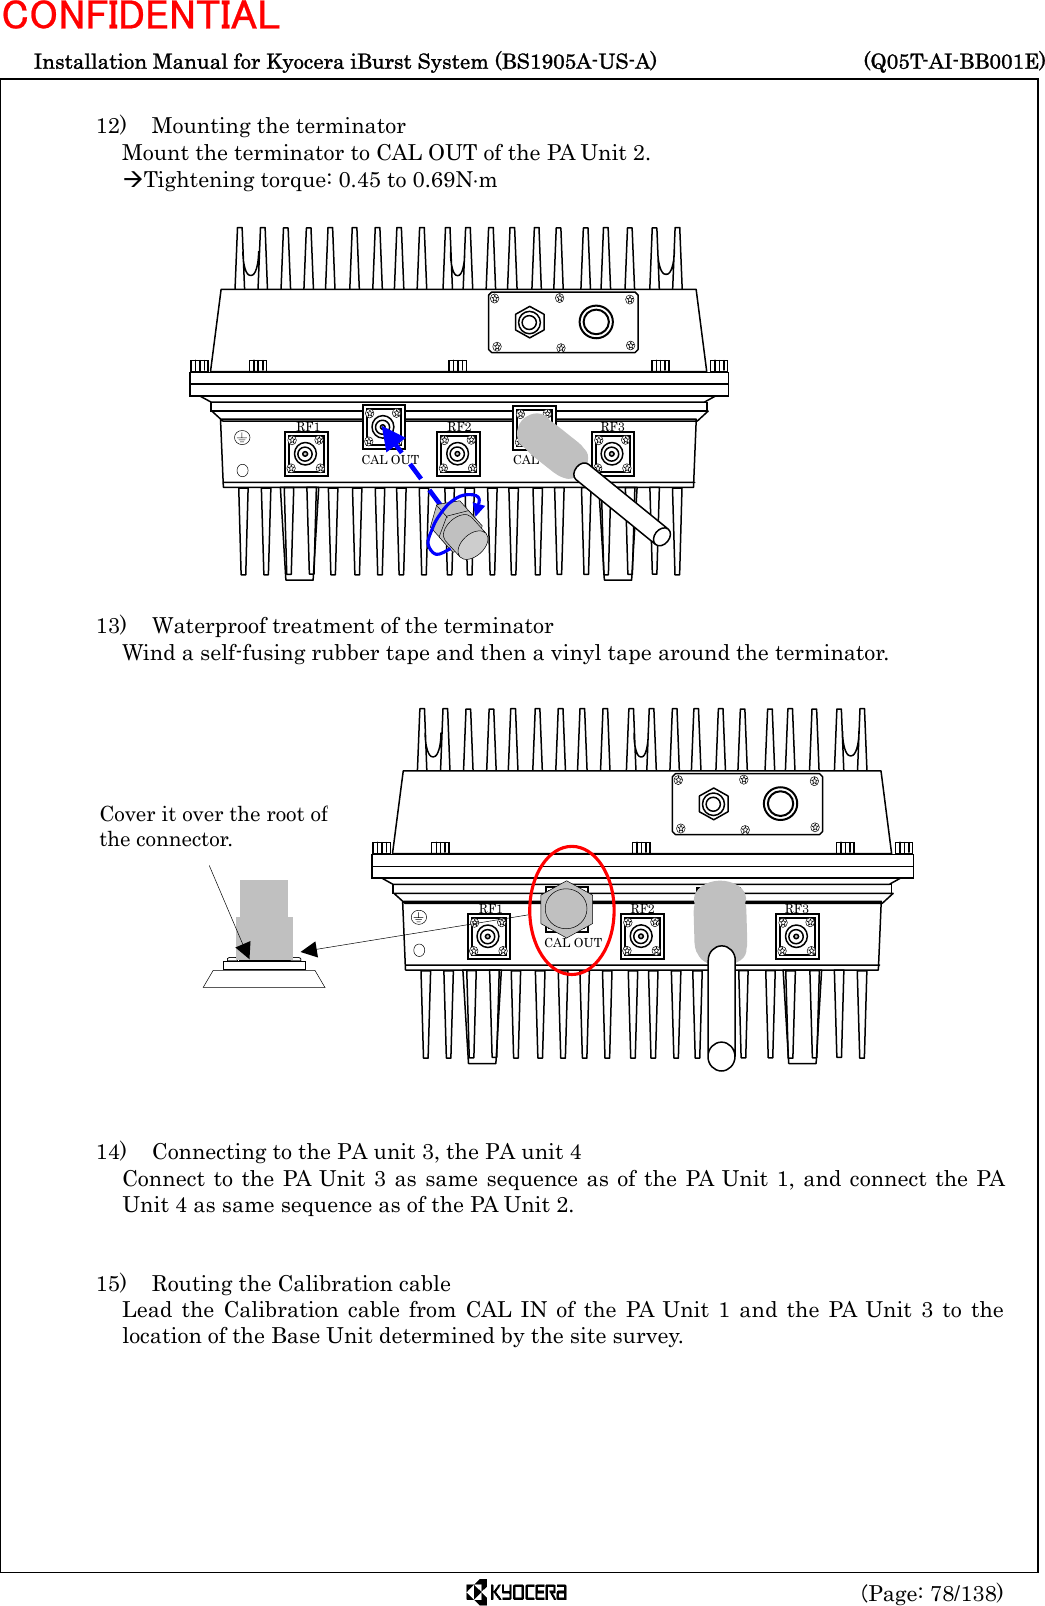  Installation Manual for Kyocera iBurst System (BS1905A-US-A)     (Q05T-AI-BB001E) (Page: 78/138) CONFIDENTIAL  12)    Mounting the terminator Mount the terminator to CAL OUT of the PA Unit 2. ÆTightening torque: 0.45 to 0.69N⋅m                 13)    Waterproof treatment of the terminator Wind a self-fusing rubber tape and then a vinyl tape around the terminator.                   14)    Connecting to the PA unit 3, the PA unit 4 Connect to the PA Unit 3 as same sequence as of the PA Unit 1, and connect the PA Unit 4 as same sequence as of the PA Unit 2.   15)    Routing the Calibration cable Lead the Calibration cable from CAL IN of the PA Unit 1 and the PA Unit 3 to the location of the Base Unit determined by the site survey.   RF3 RF2 RF1 CAL OUT  CAL IN  RF3 RF2 RF1 CAL OUT  CAL IN Cover it over the root ofthe connector. 